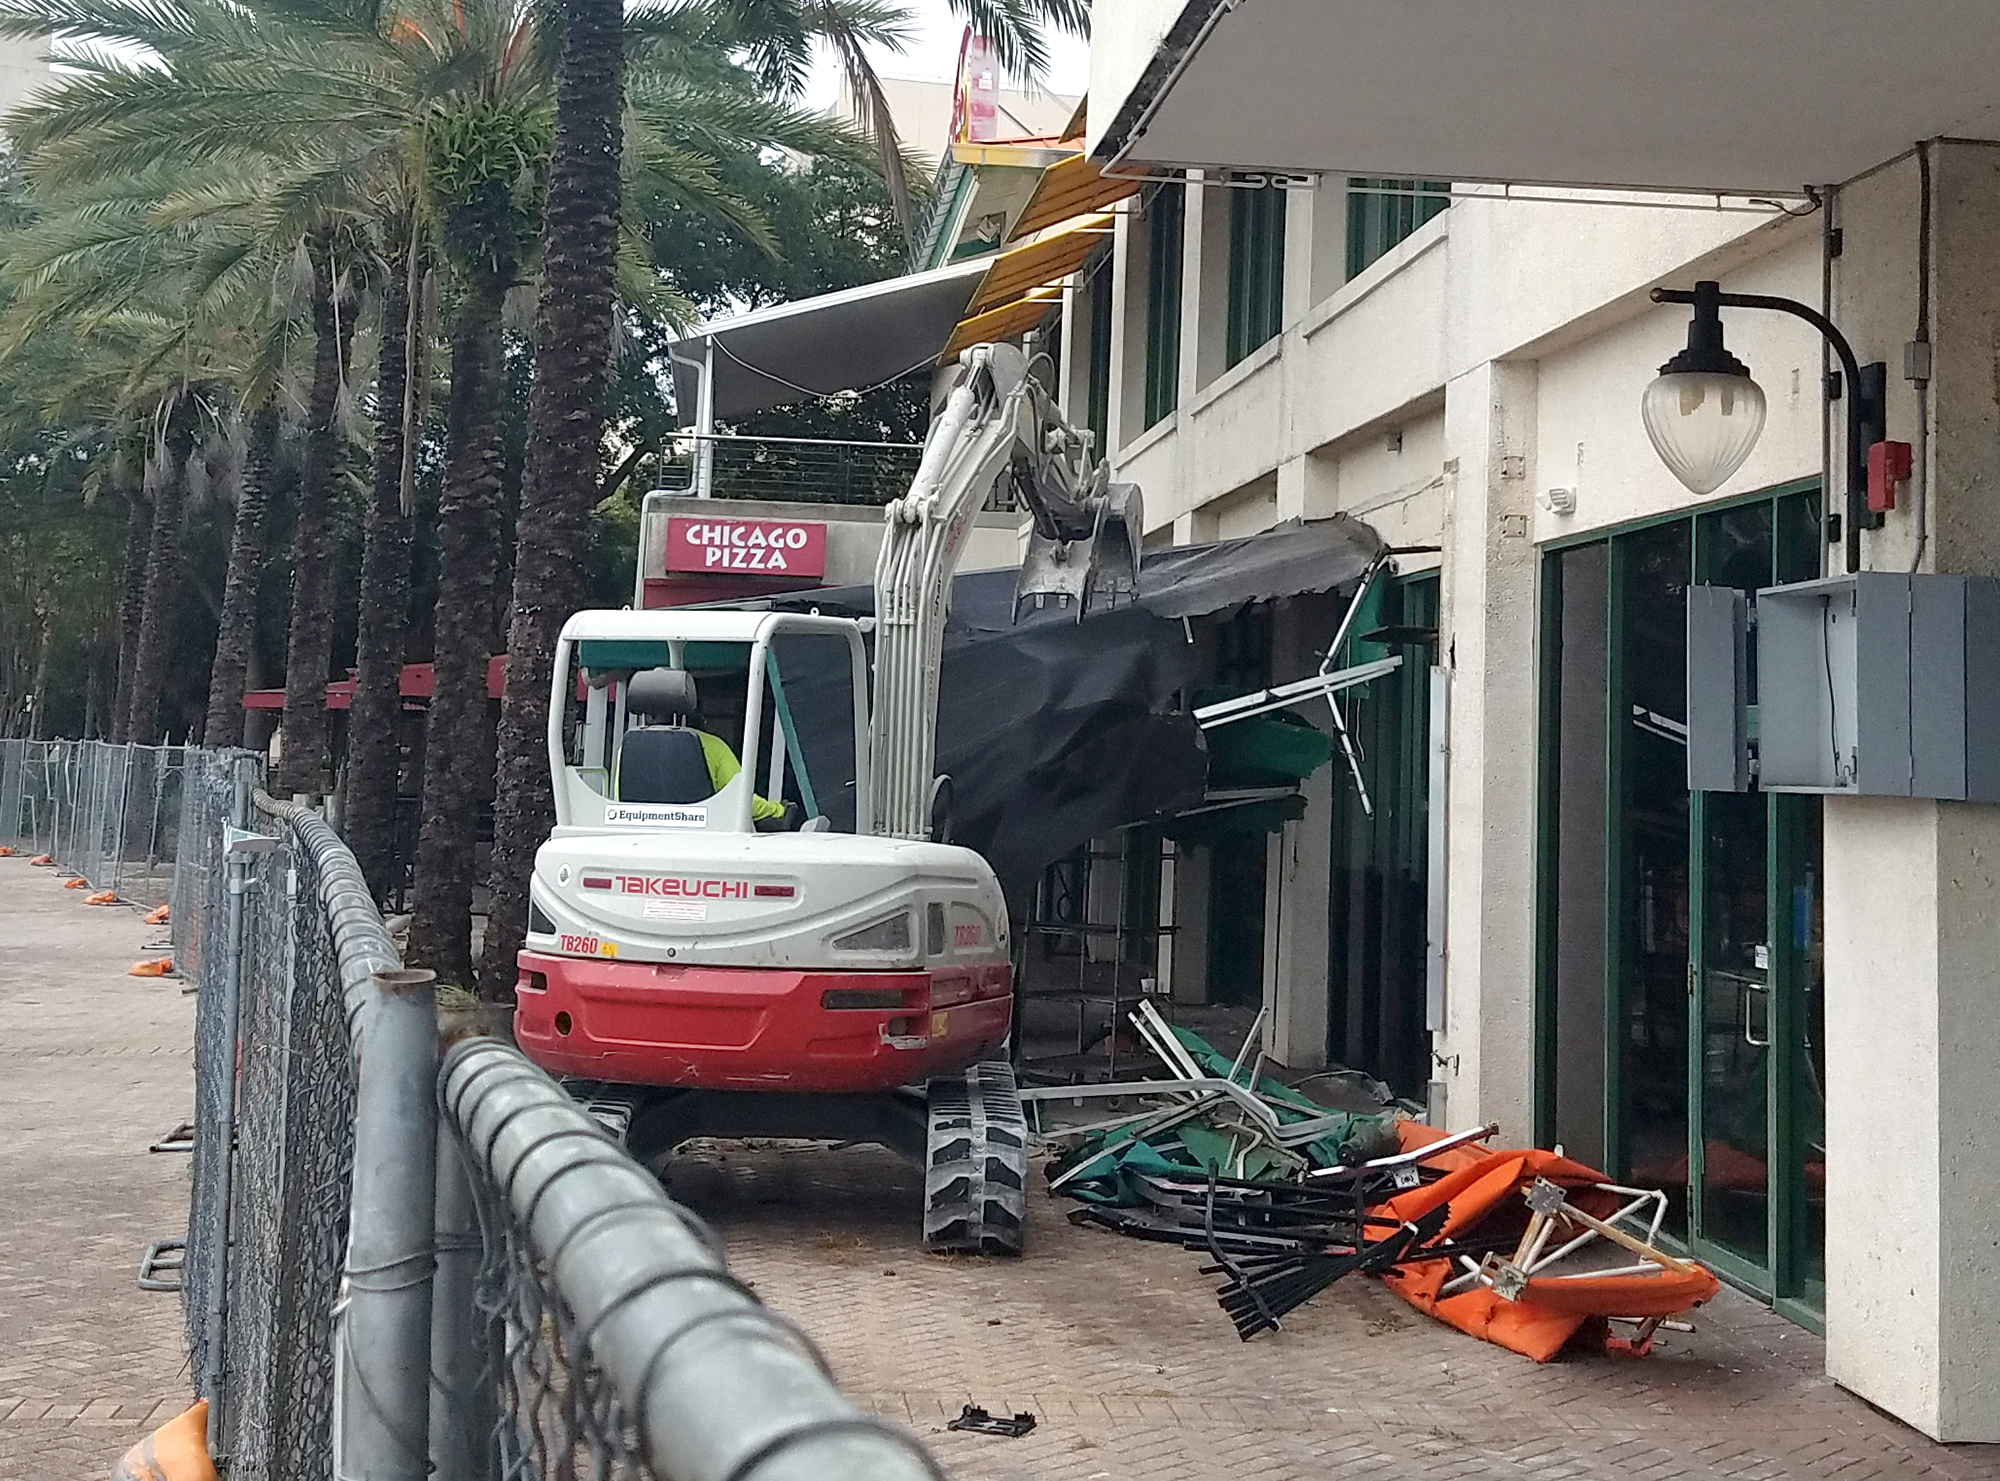 Workers tear down the awning near Chicago Pizza at The Jacksonville Landing on Tuesday.